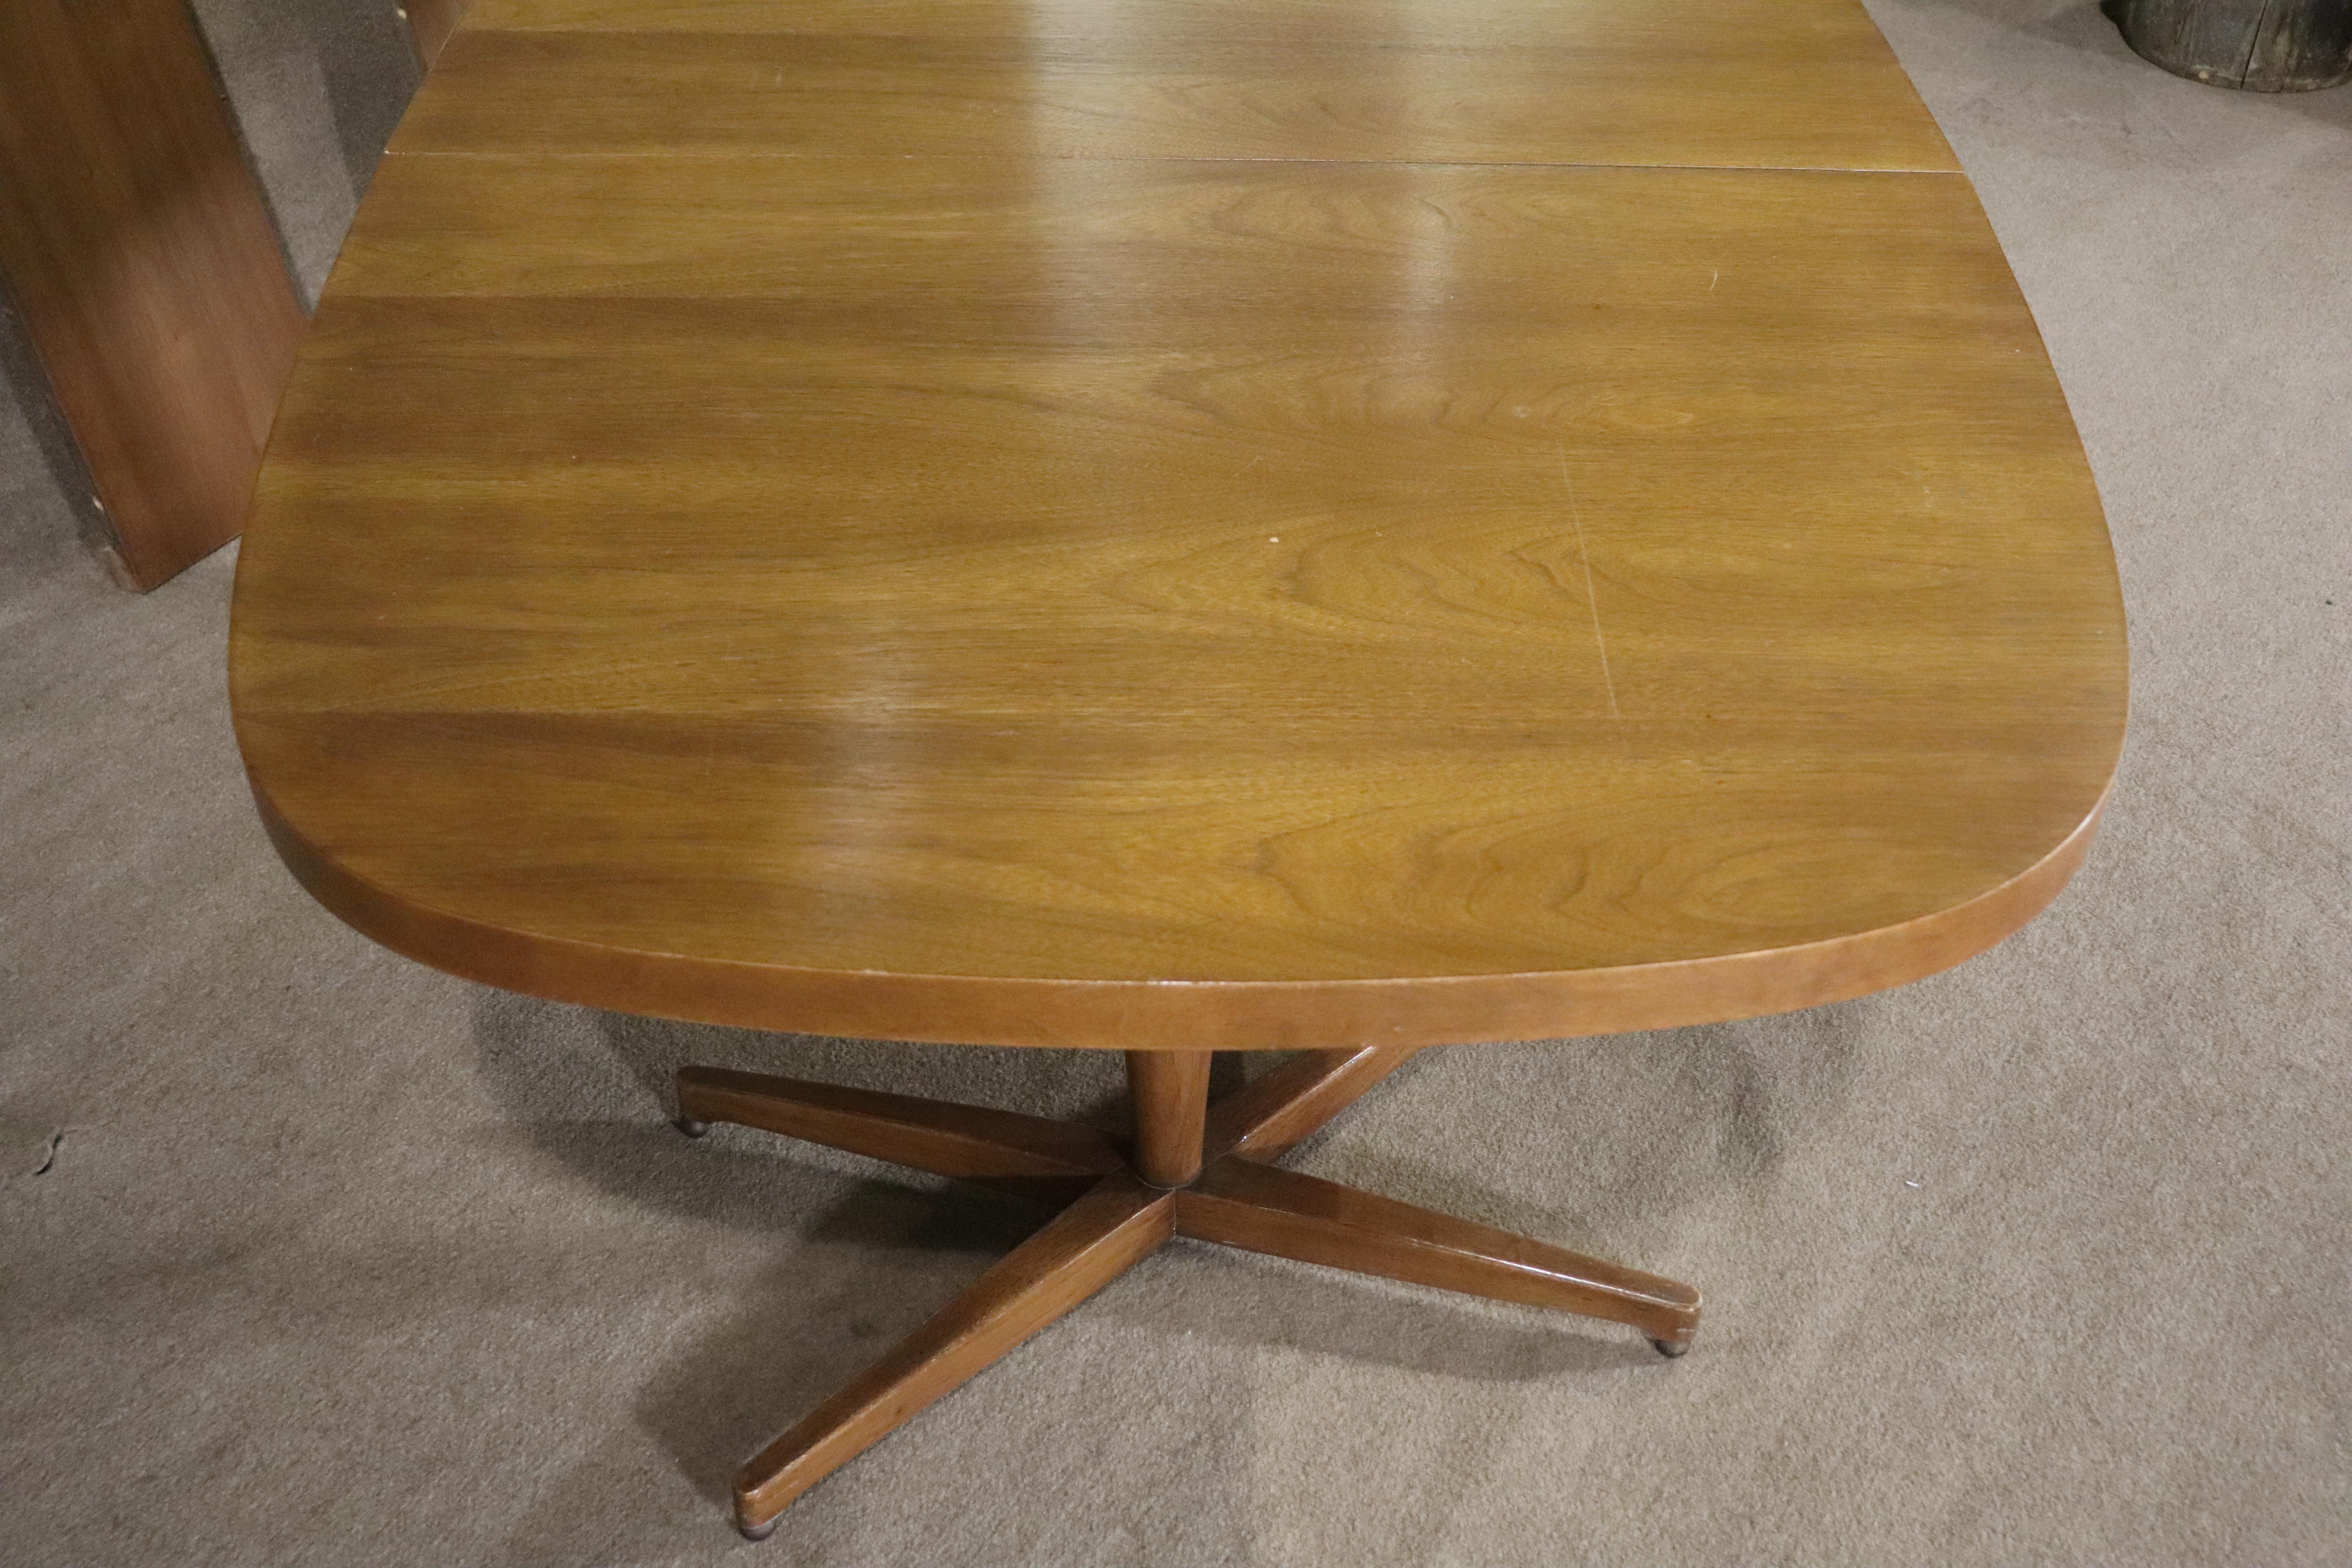 Oval dining table on two pedestals with three additional leaves. Table can accommodate many chairs when it is opened to 8 1/2 feet long.
Please confirm location NY or NJ